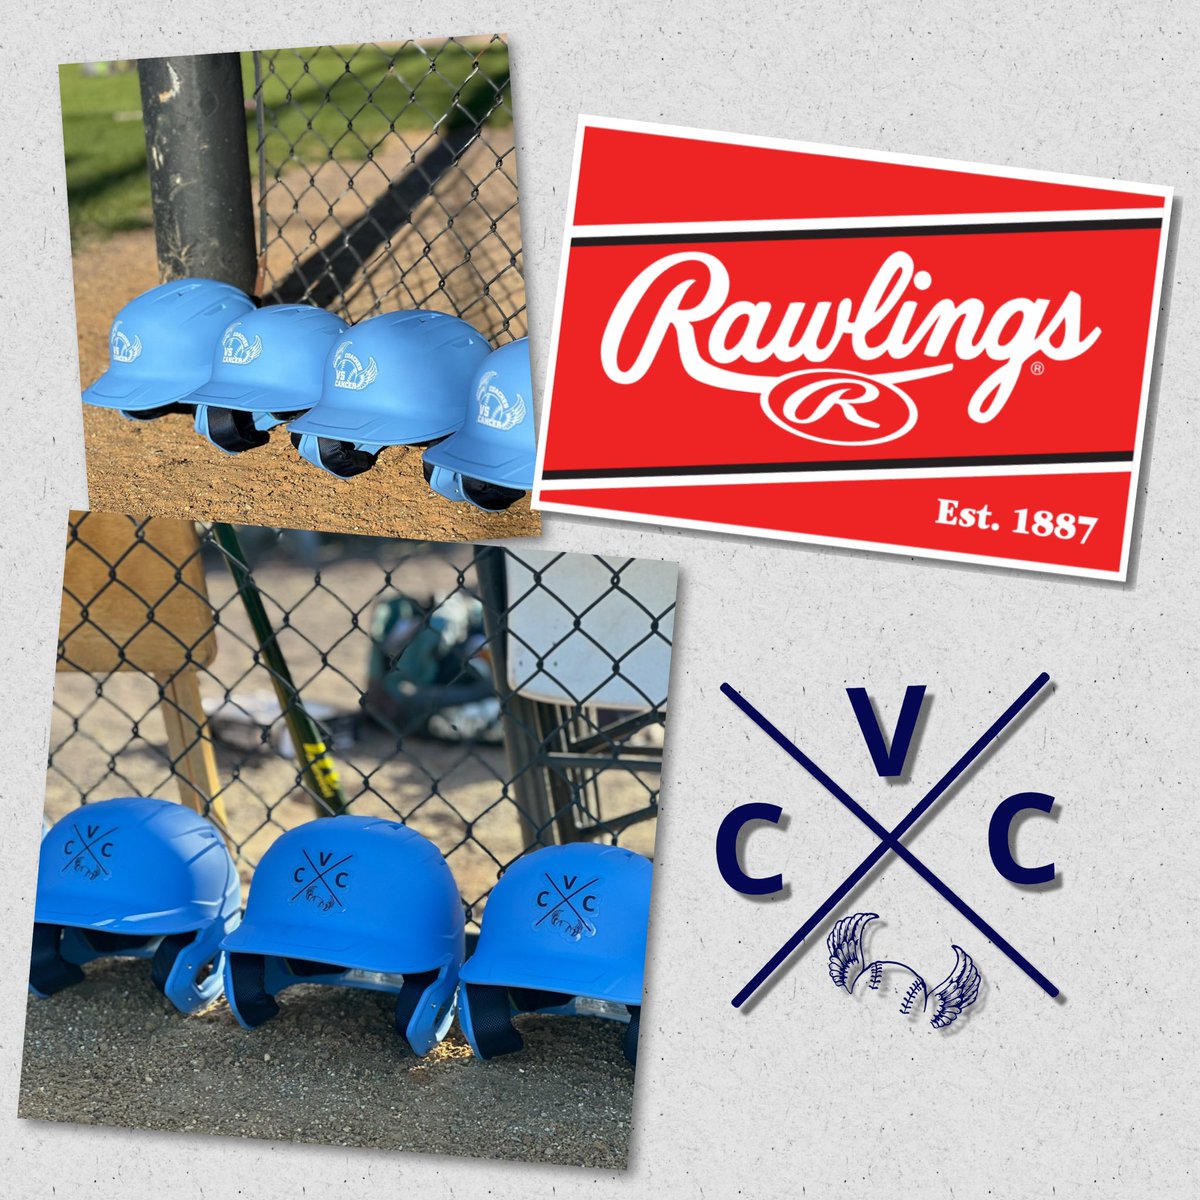 Each team will be rocking CvC helmets throughout the weekend thanks to @RawlingsSports 

#crushcancer #CvC2024